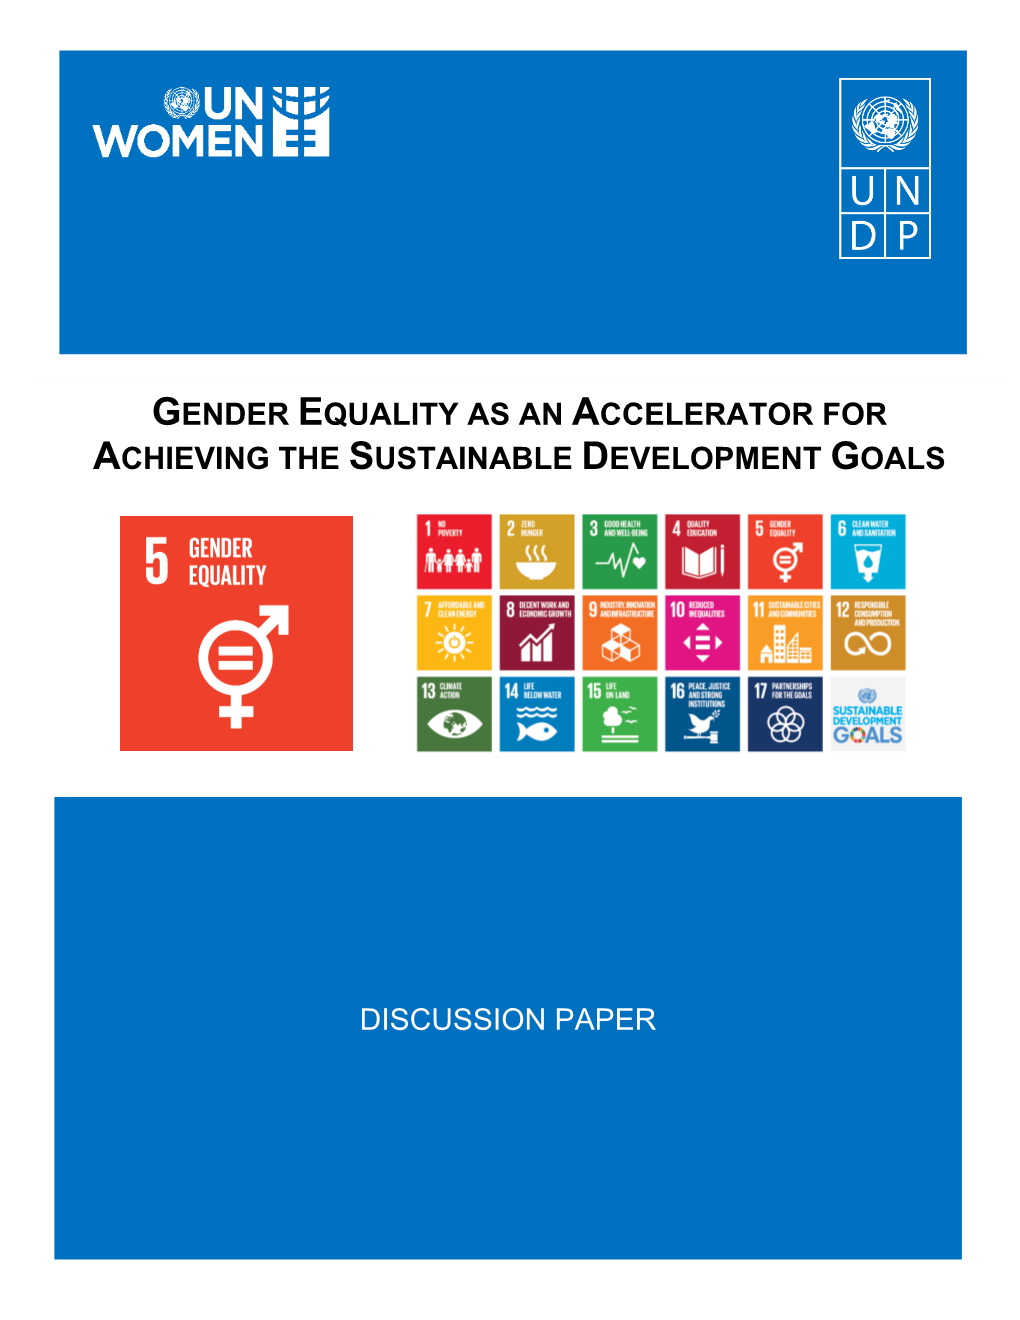 Gender Equality As an Accelerator for Achieving the Sdgs